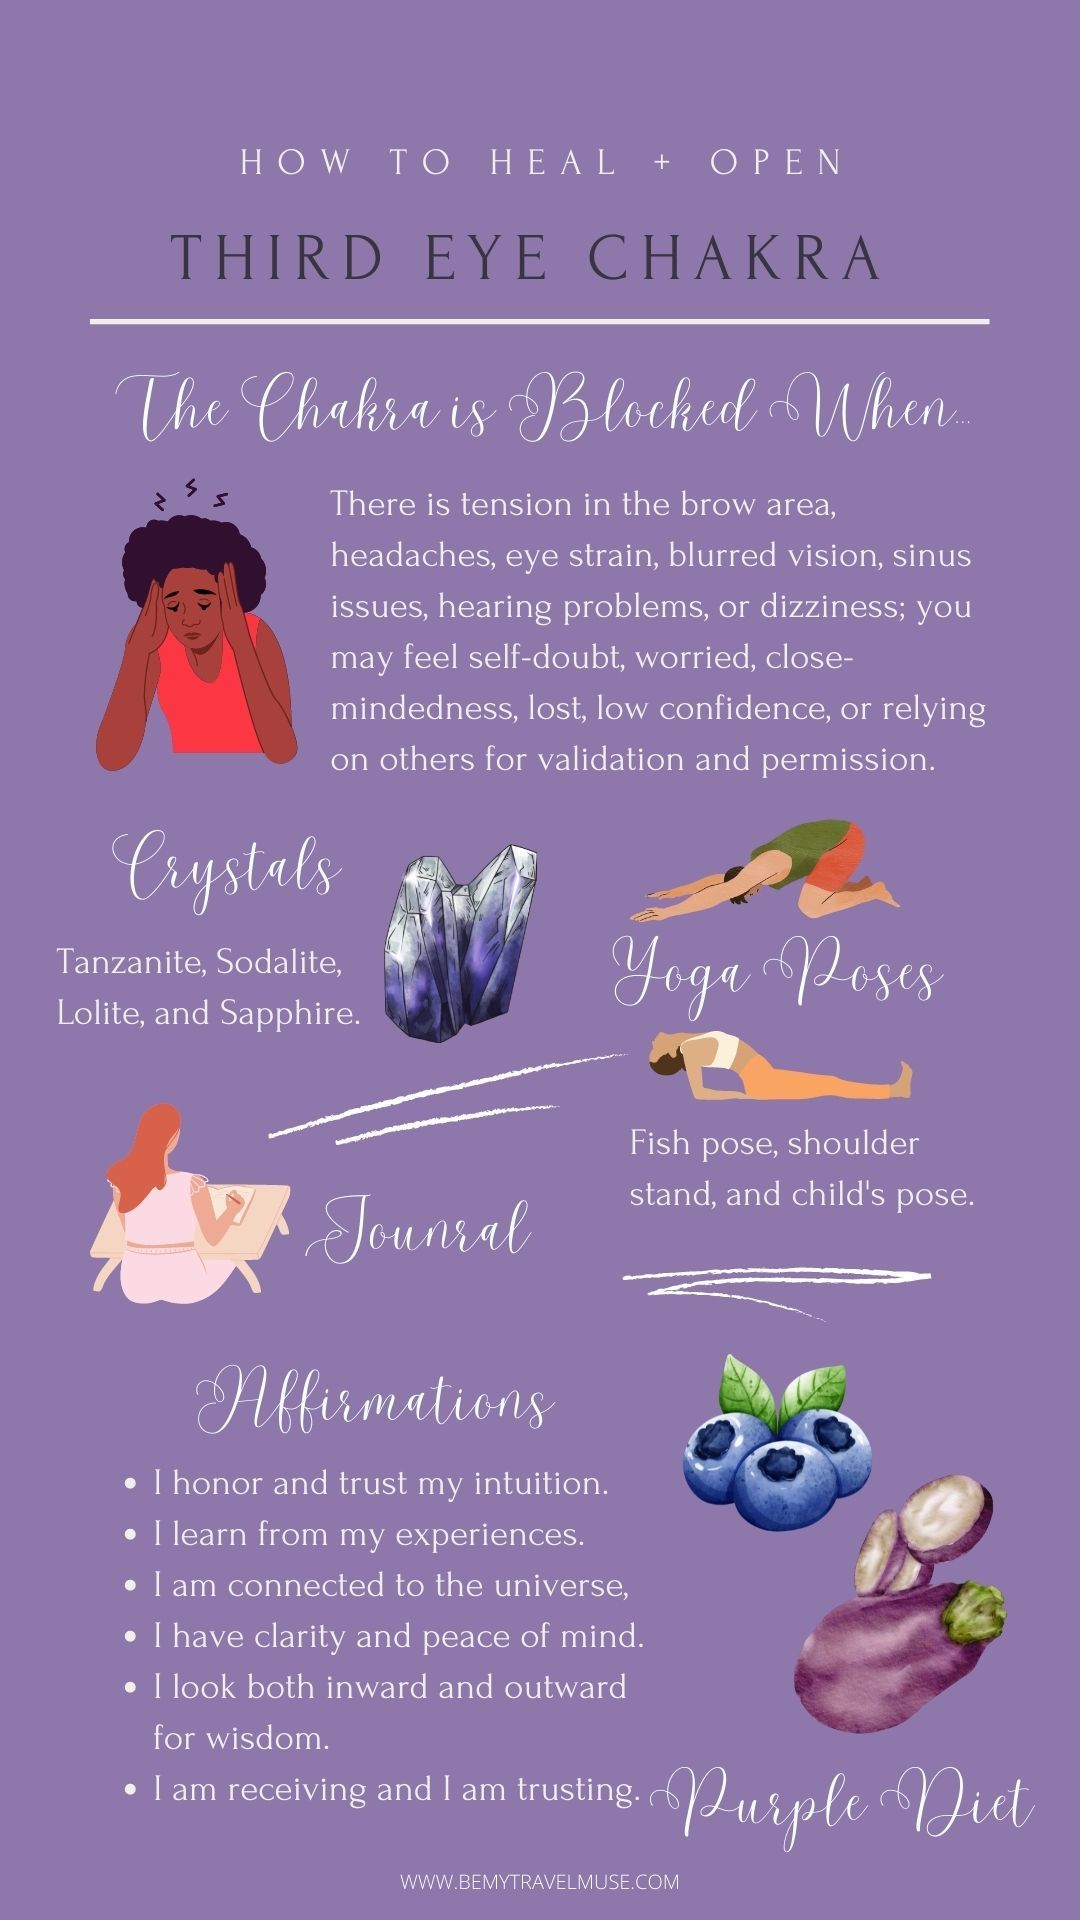 Open Your Third Eye Chakra: A Complete Guide